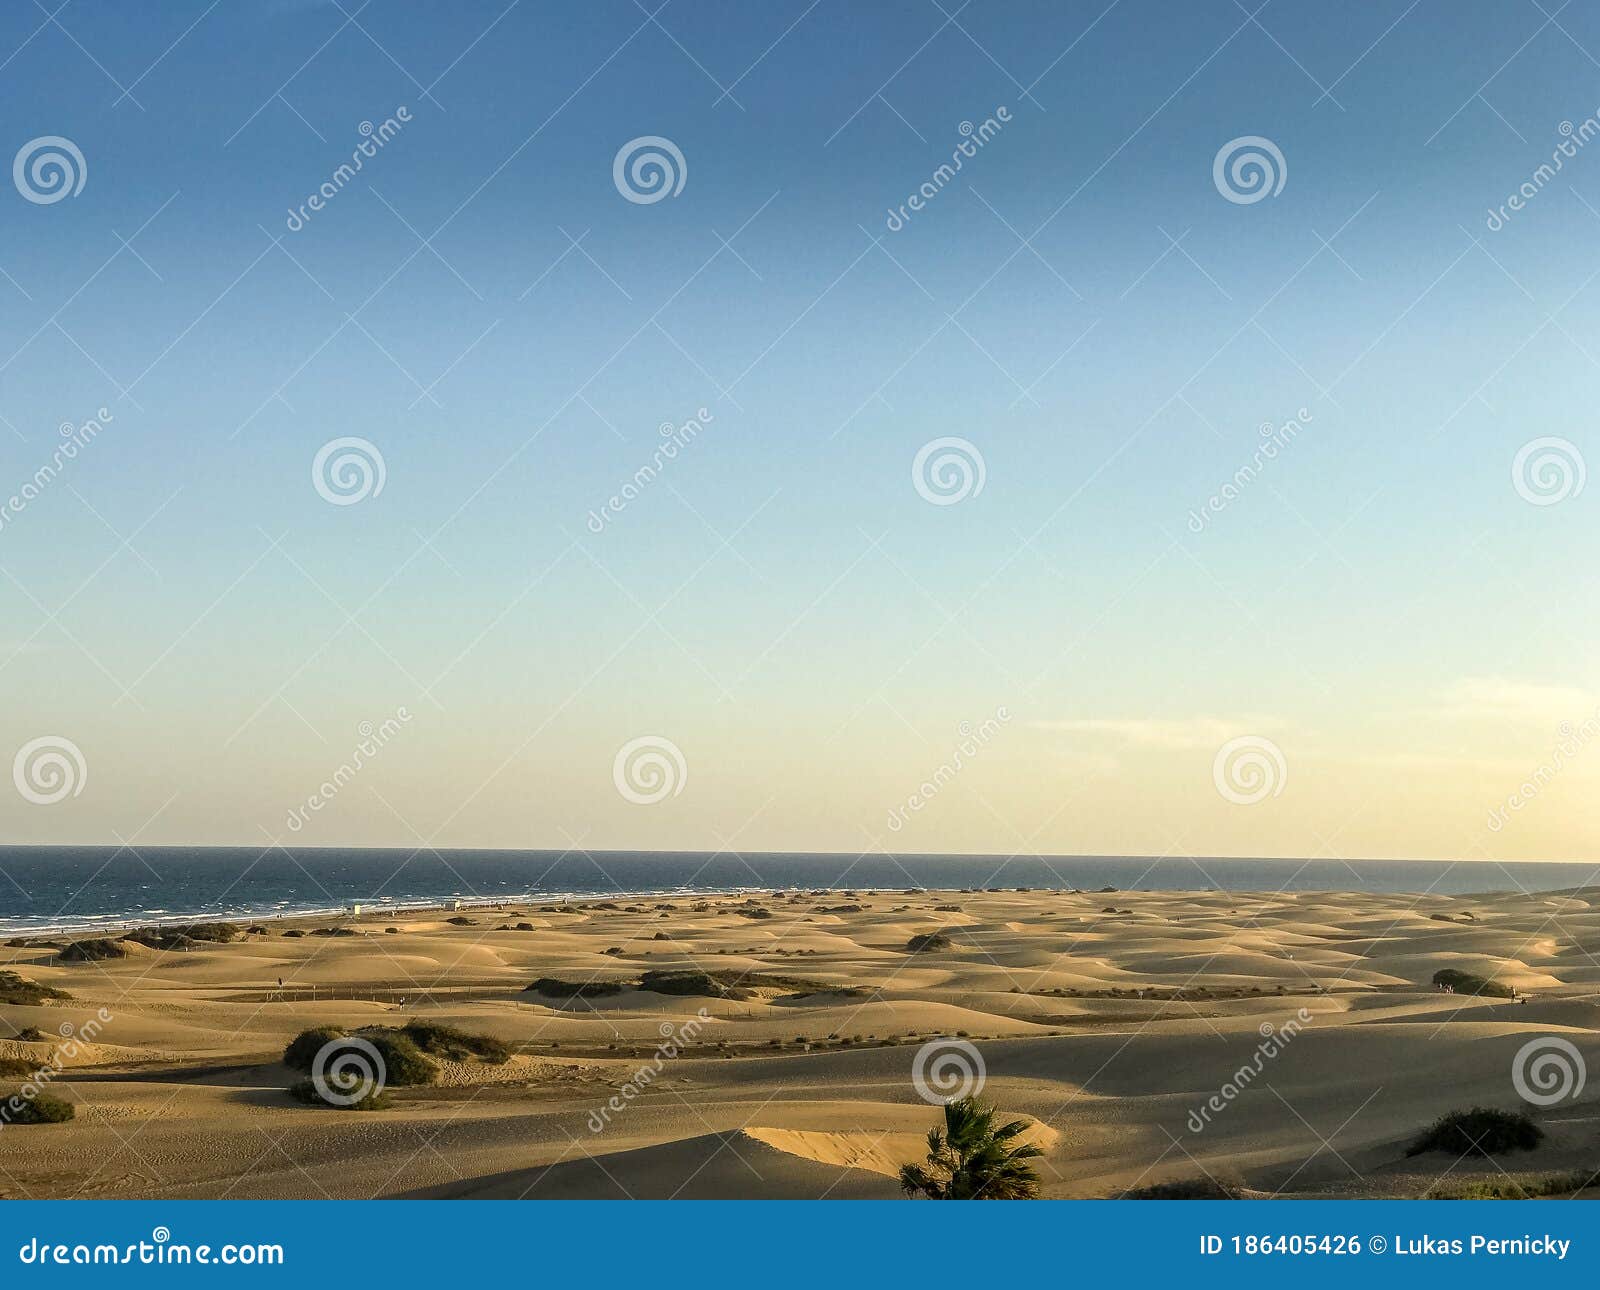 Sand Dunes Around A City Full Of People Walking Down The